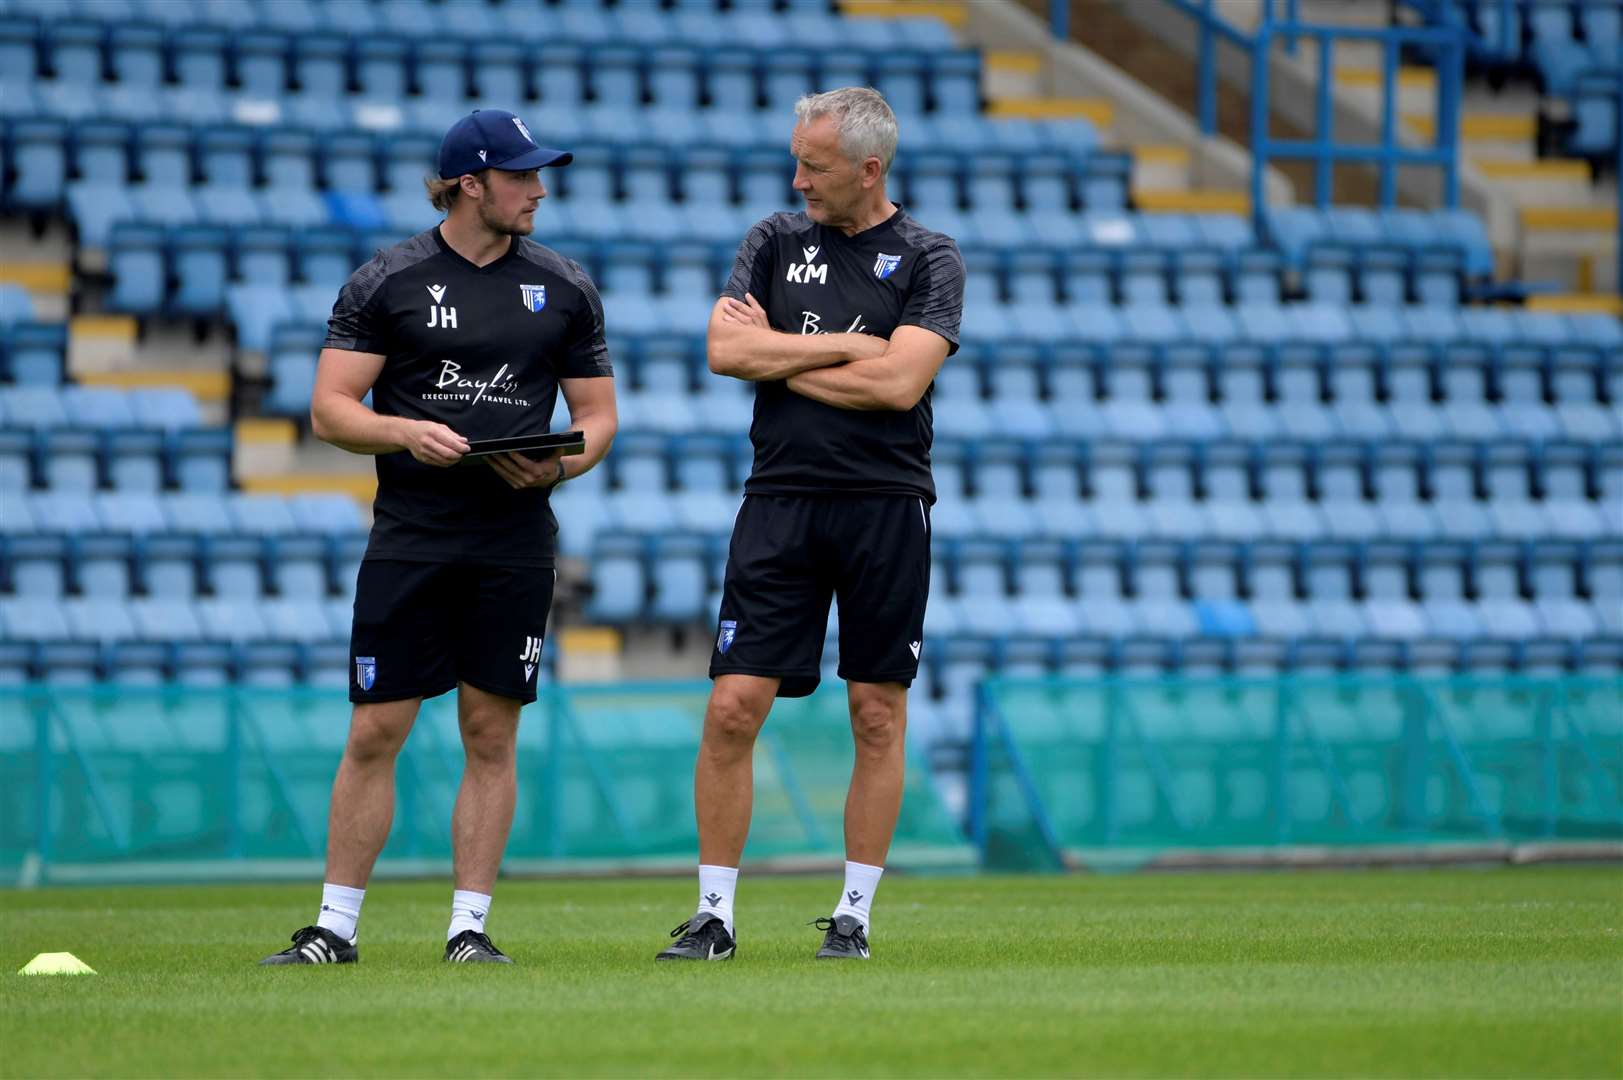 Sports science intern James Hoyte with Head of Academy Coaching, Keith Millen chat during the session Picture: Barry Goodwin